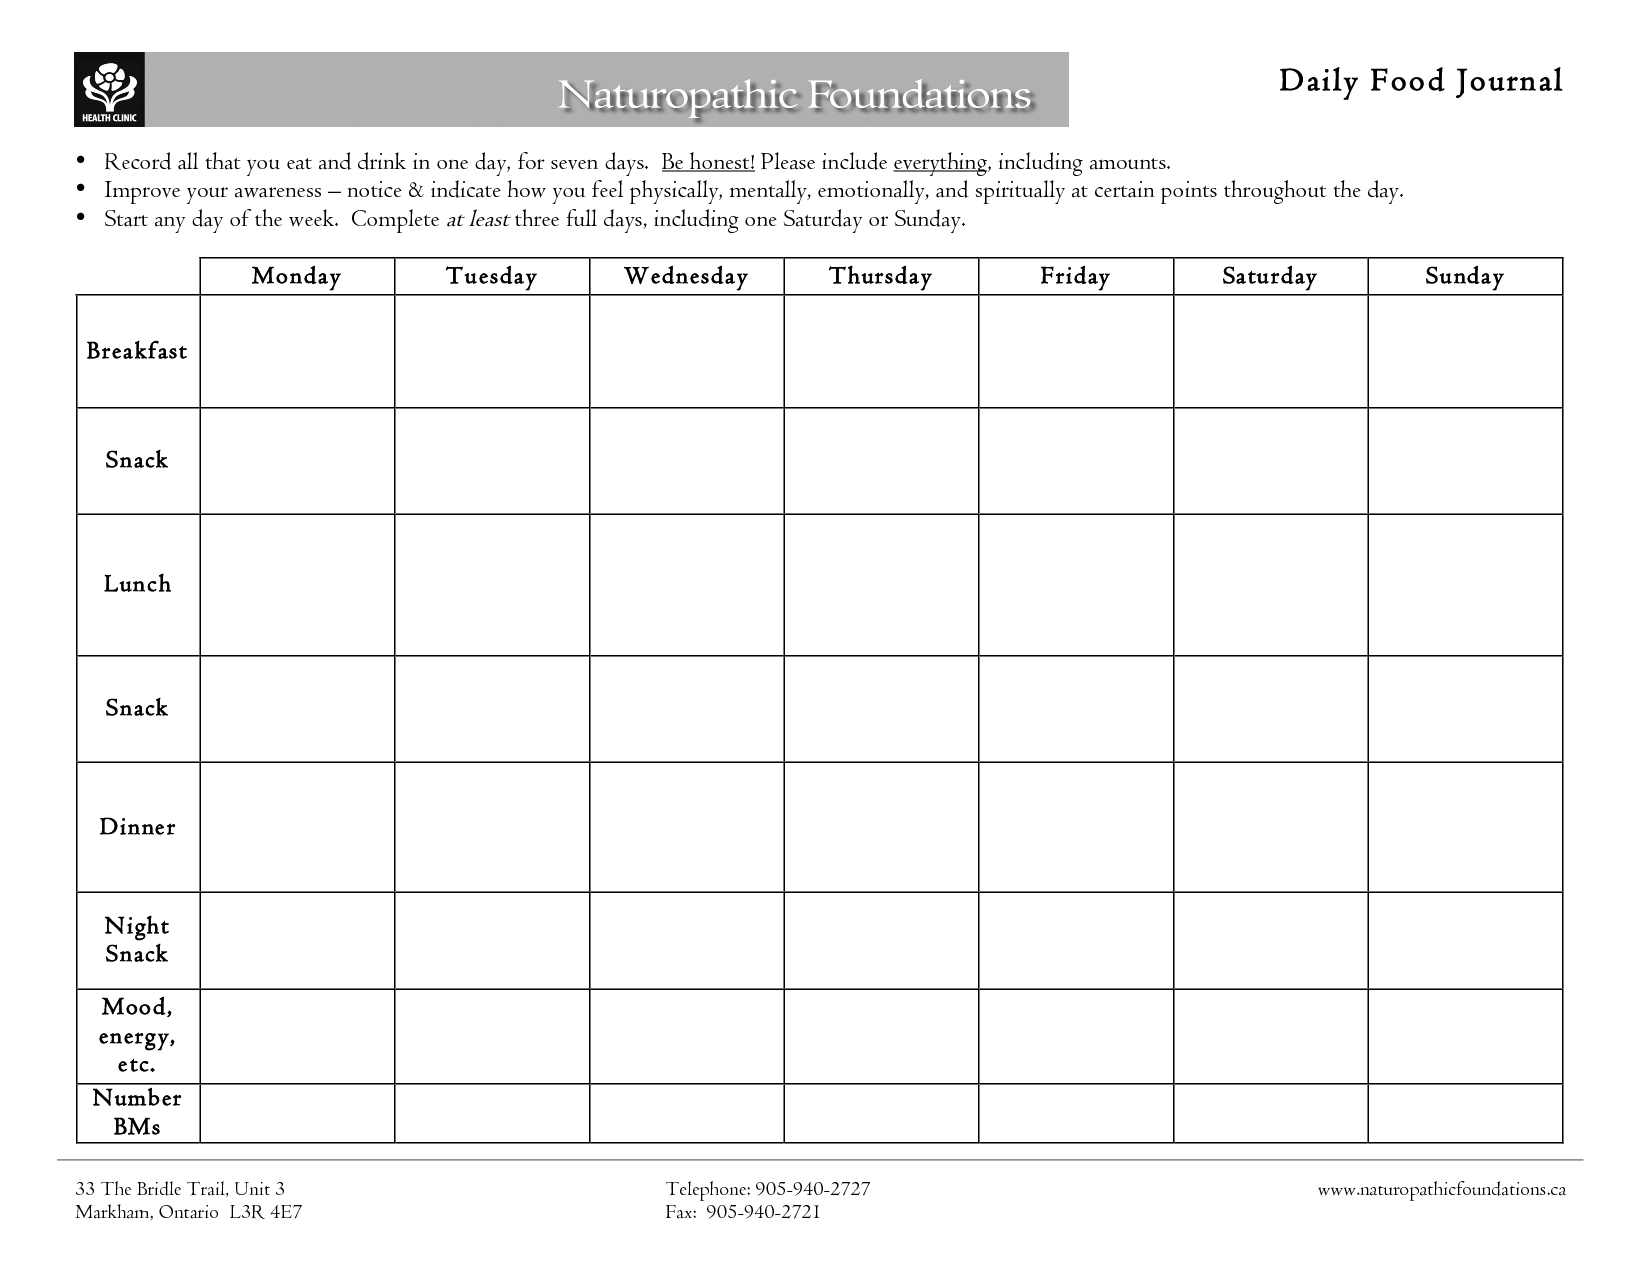 5-best-images-of-7-day-food-diary-printable-food-diary-log-sheets